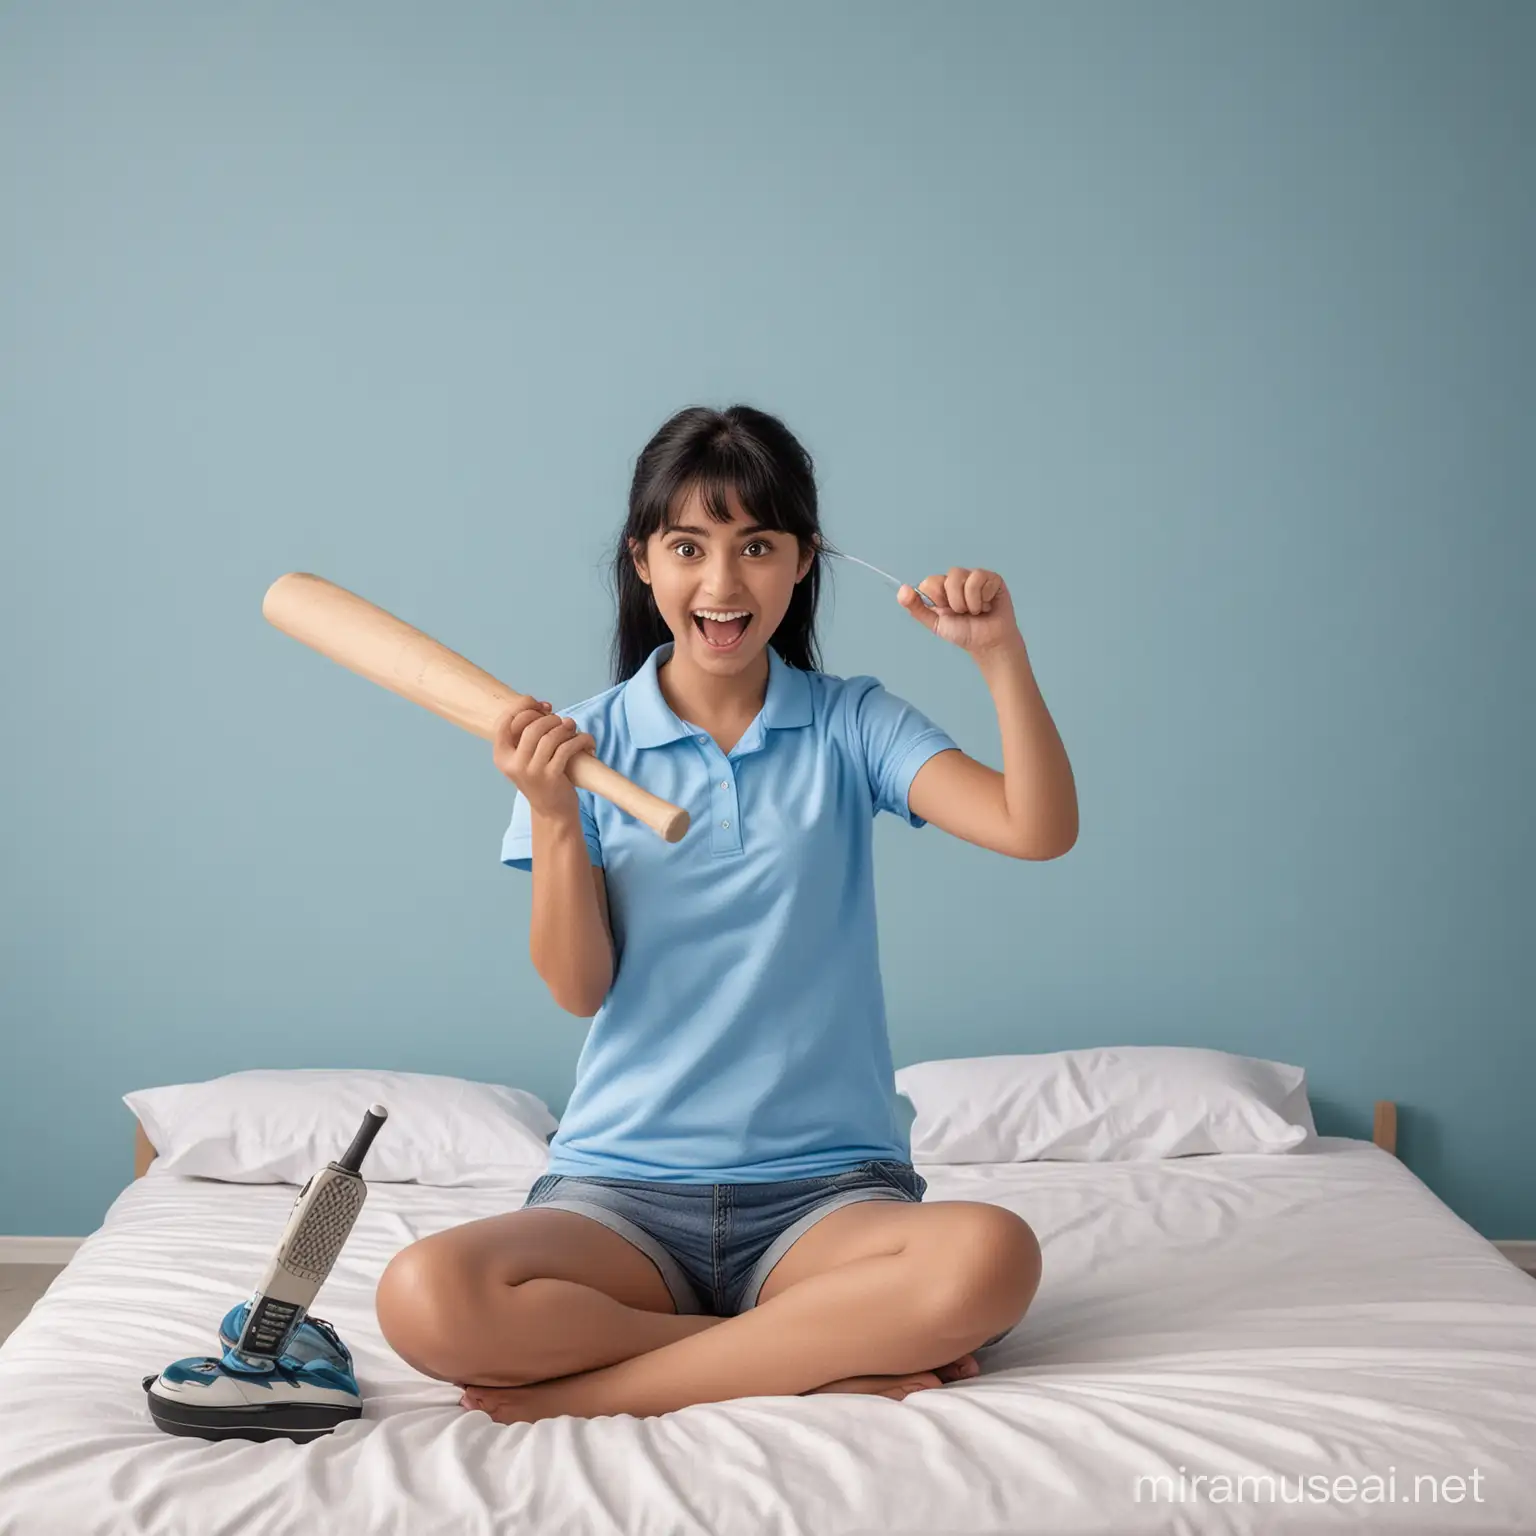 GIRL WITH BLACK HAIR WATCHING TV  ON MATTRESS AND EXCITED HOLDING CRICKET BAT AND TV REMOTE IN ONE HAND. SHE IS WEARING SPORTS POLO TSHIRT BLUE COLOUR. FRONT VIEW.
